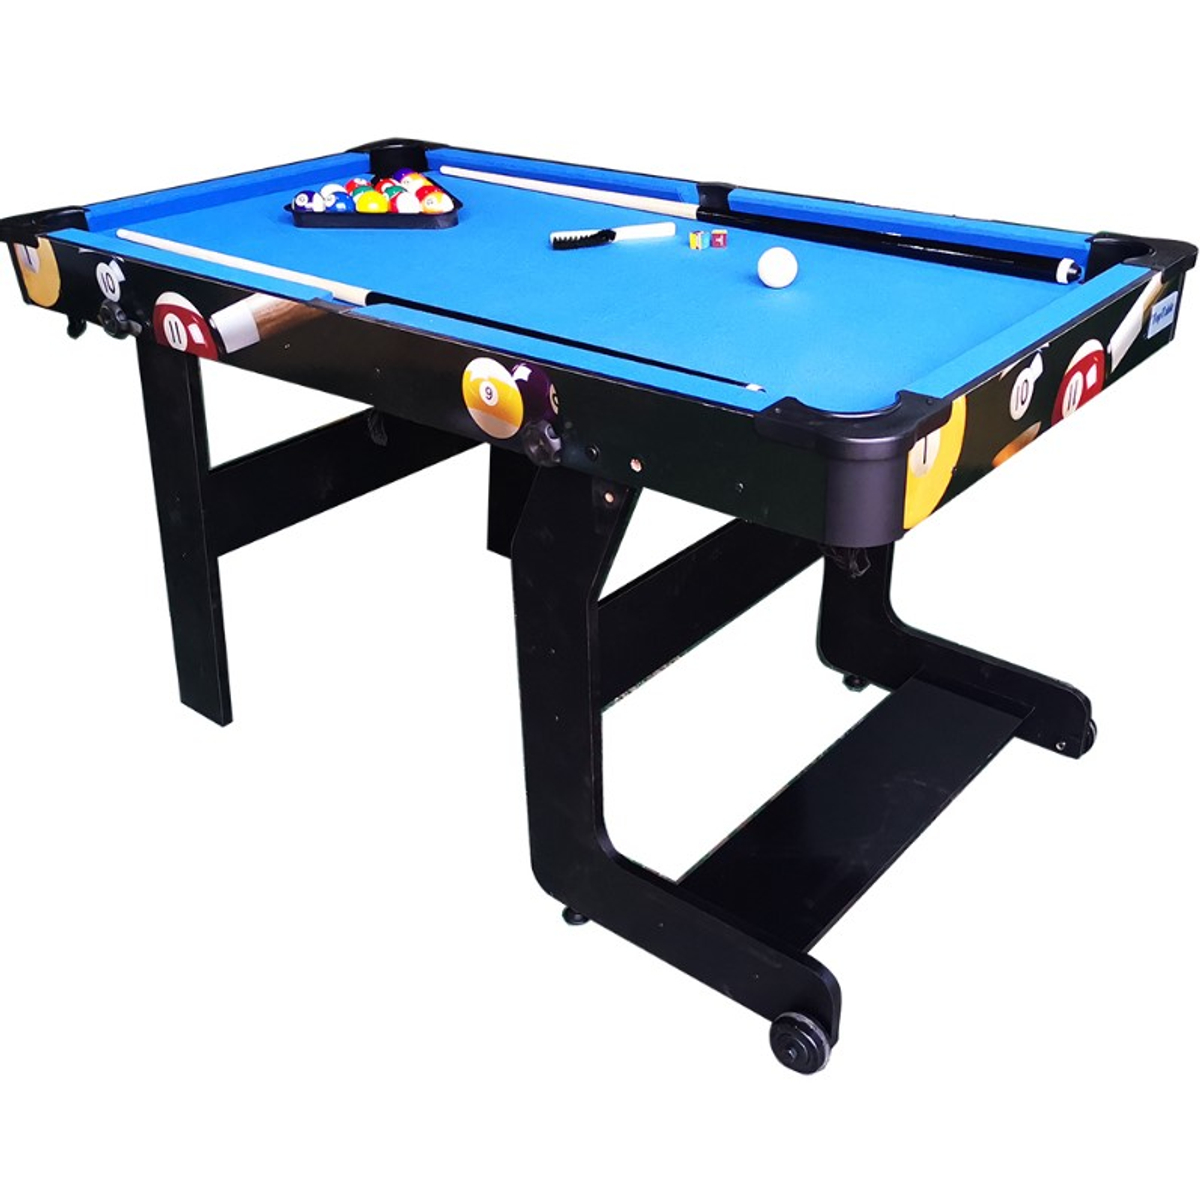 Top Table Pooltafel Fun Fold-Up 5FT